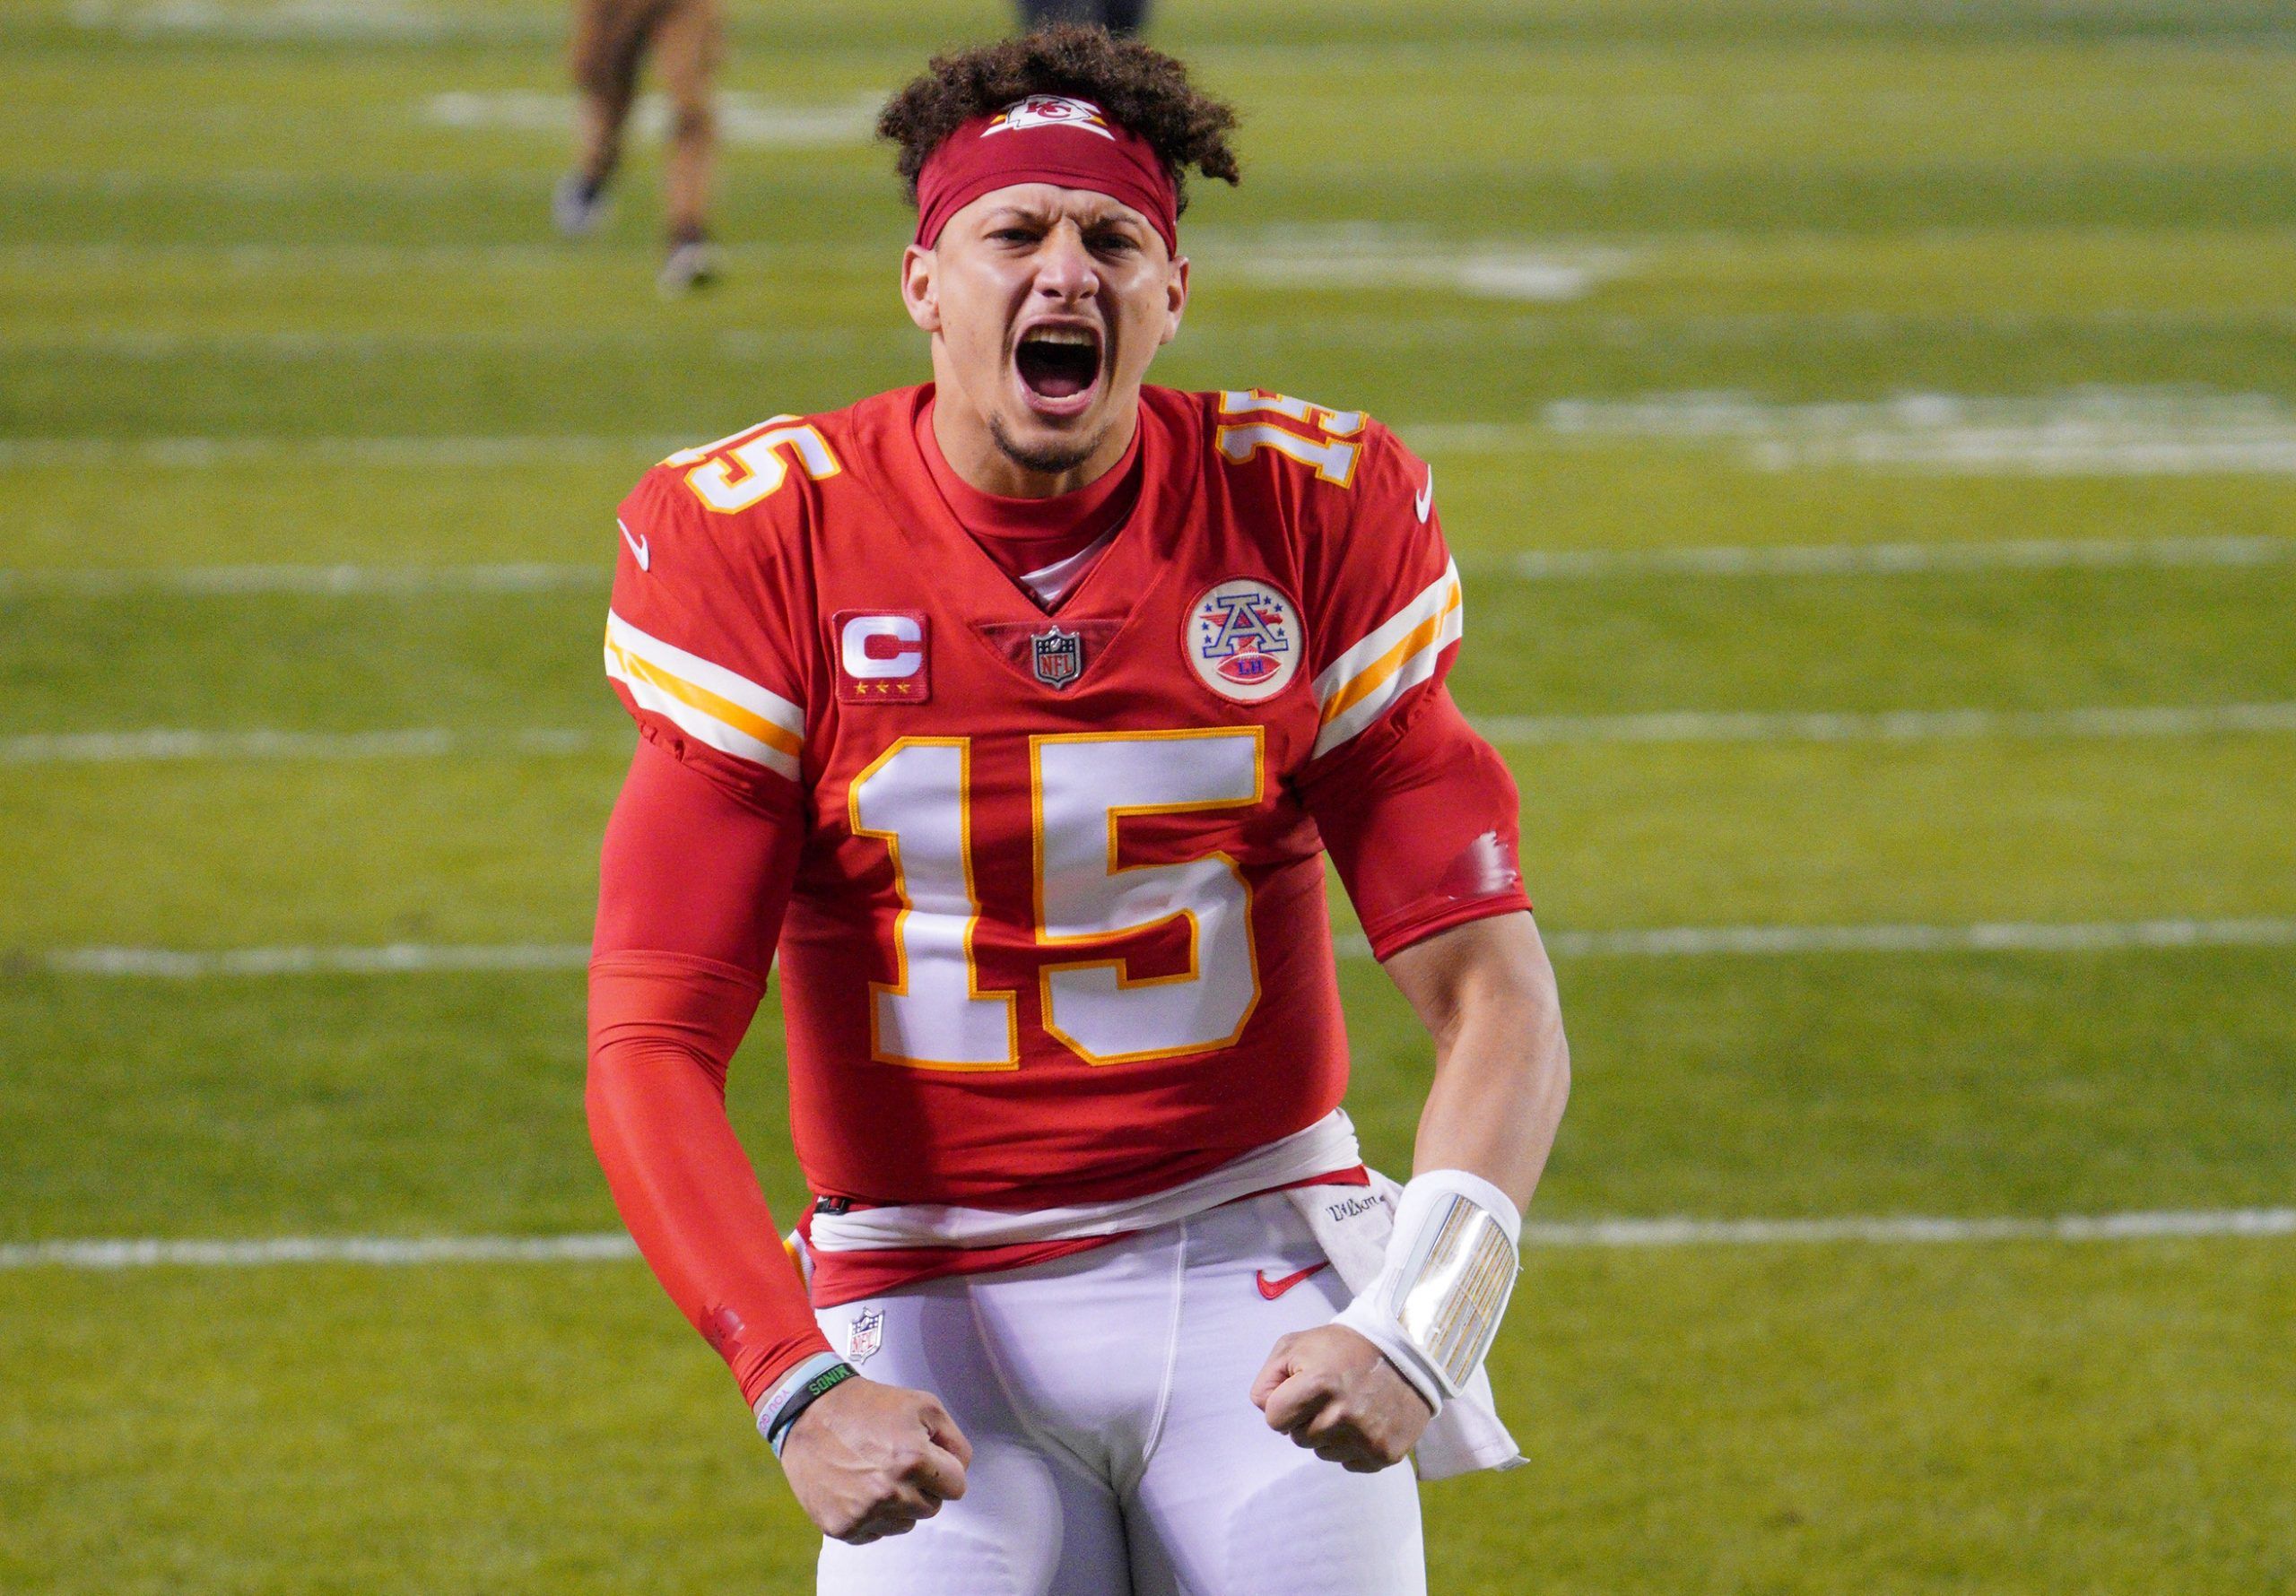 FANTASY FOOTBALL PREVIEW: Mahomes takes the cake as our top QB